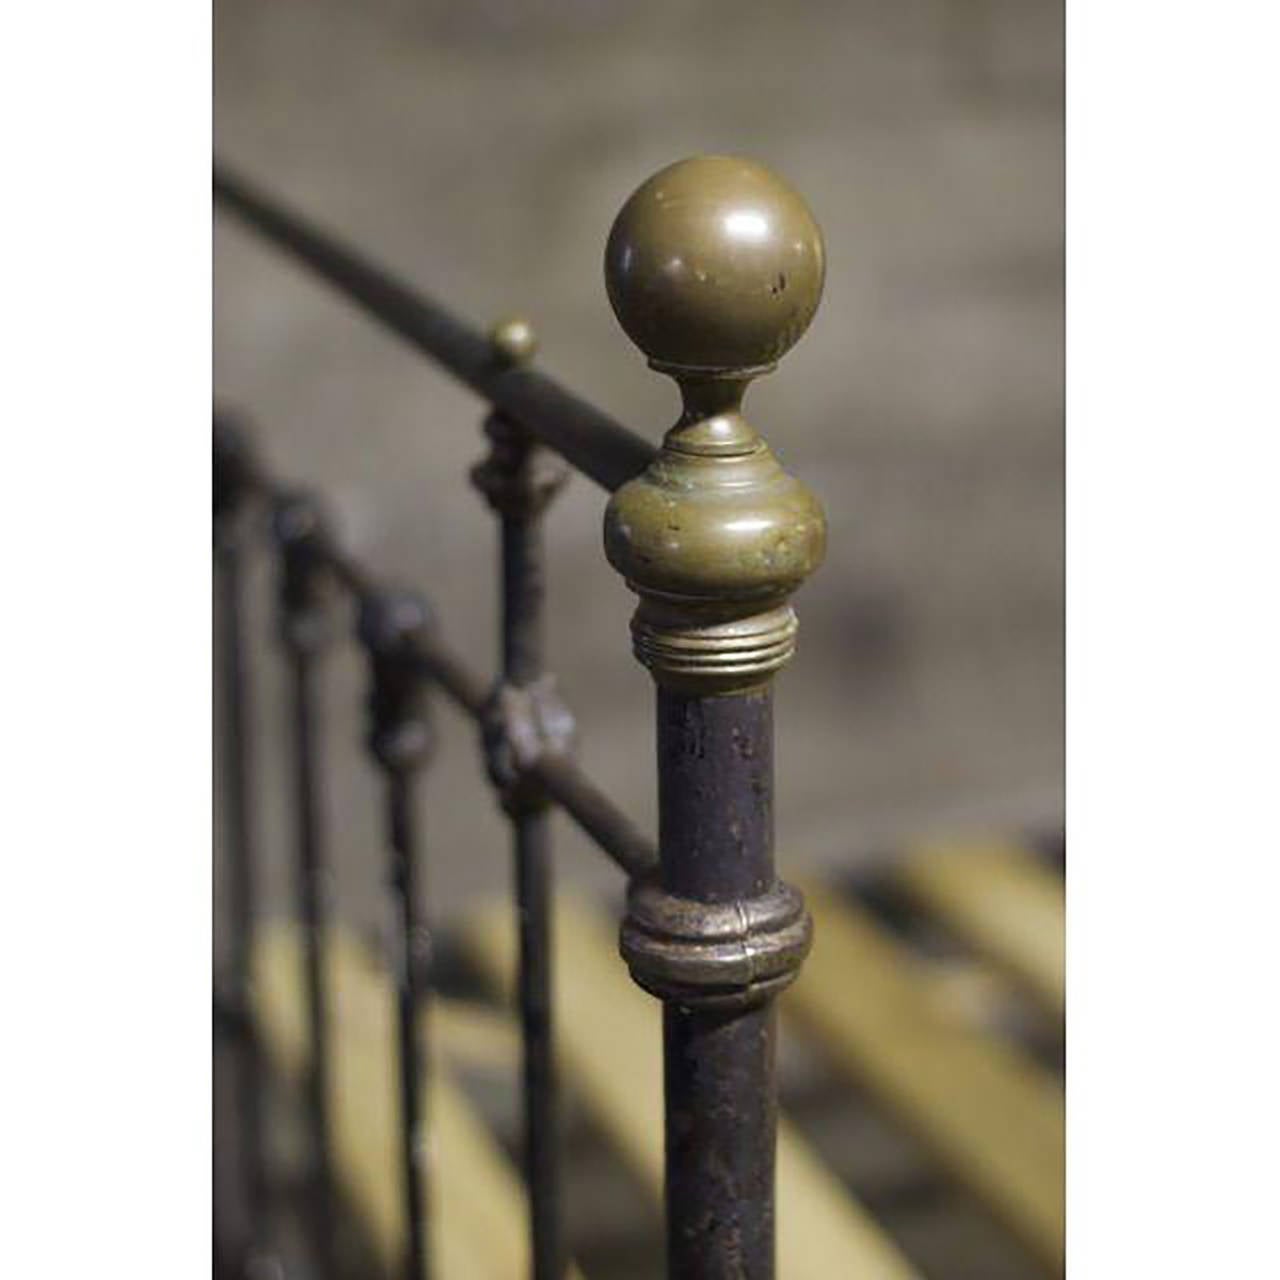 A nicely distressed 19th century cast iron and brass bed frame with brass finials on all four posts. The bed has decorative brass detailing throughout and a solid frame. It has new custom pine and cloth slats and fits a double mattress.
Very